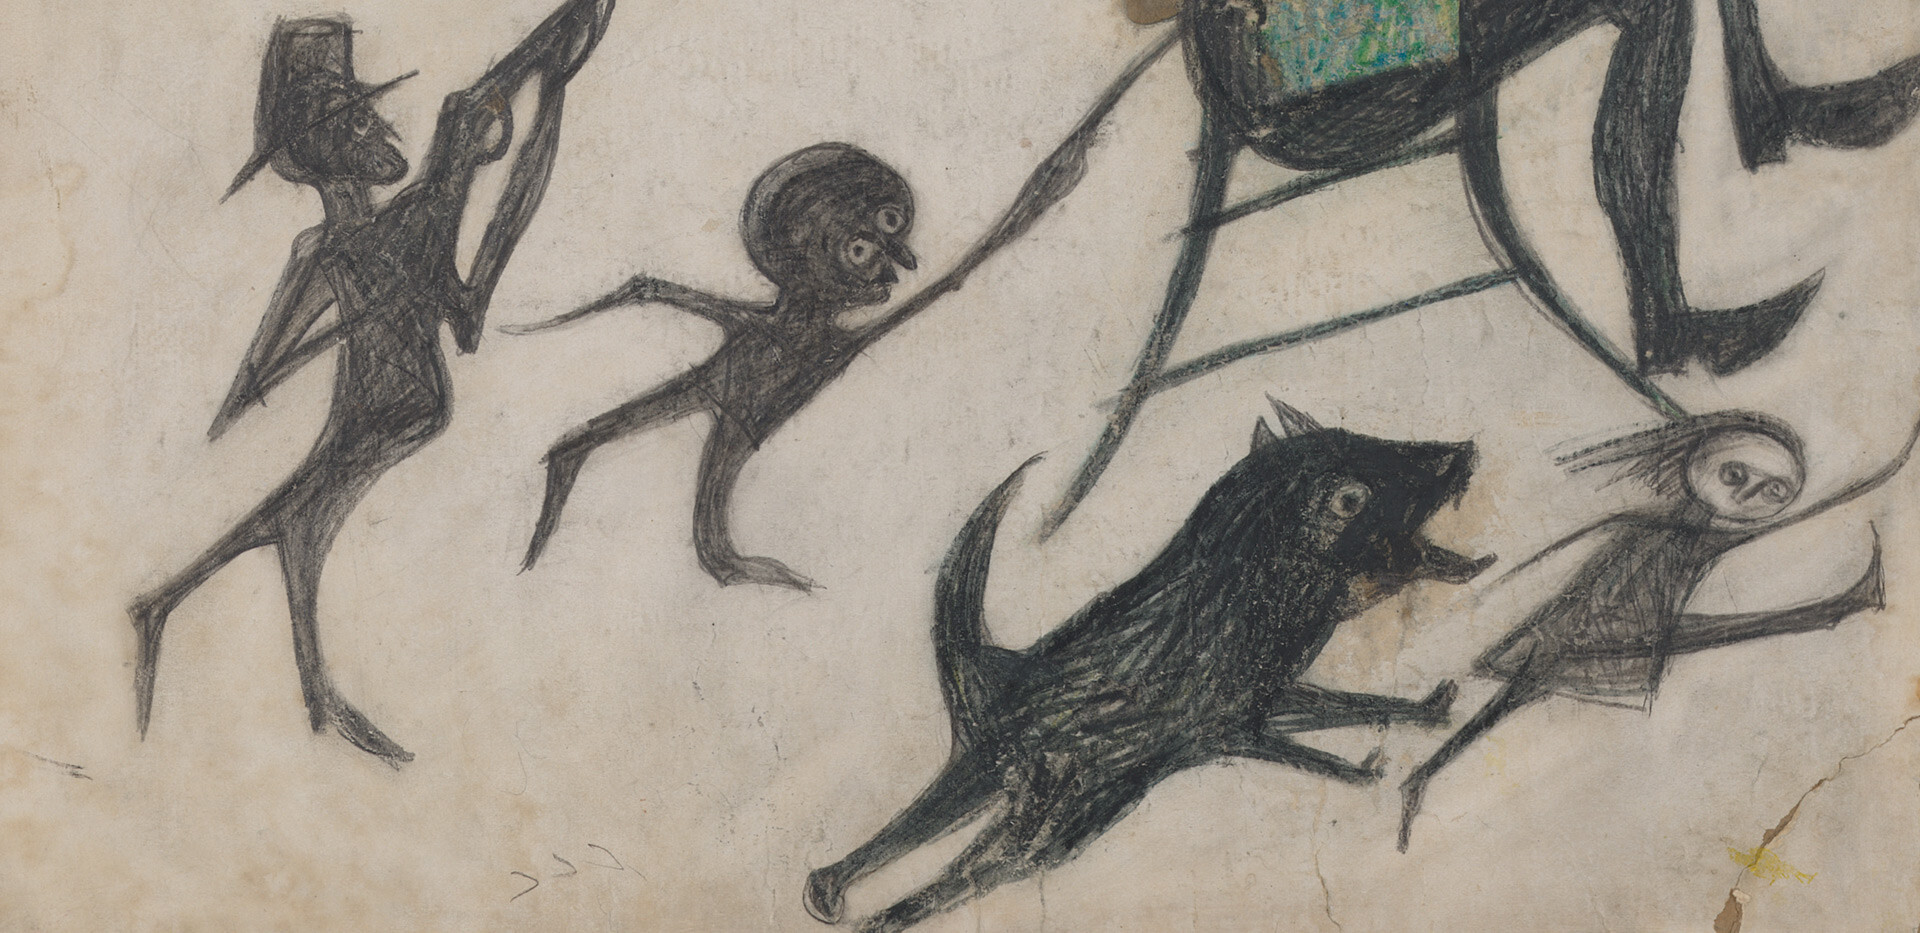 A detail from a work by Bill Traylor, titled Exciting Event (Man on Chair, Man with Rifle, Dog Chasing Girl, Yellow Bird and Other Figures), dated 1939-1942.